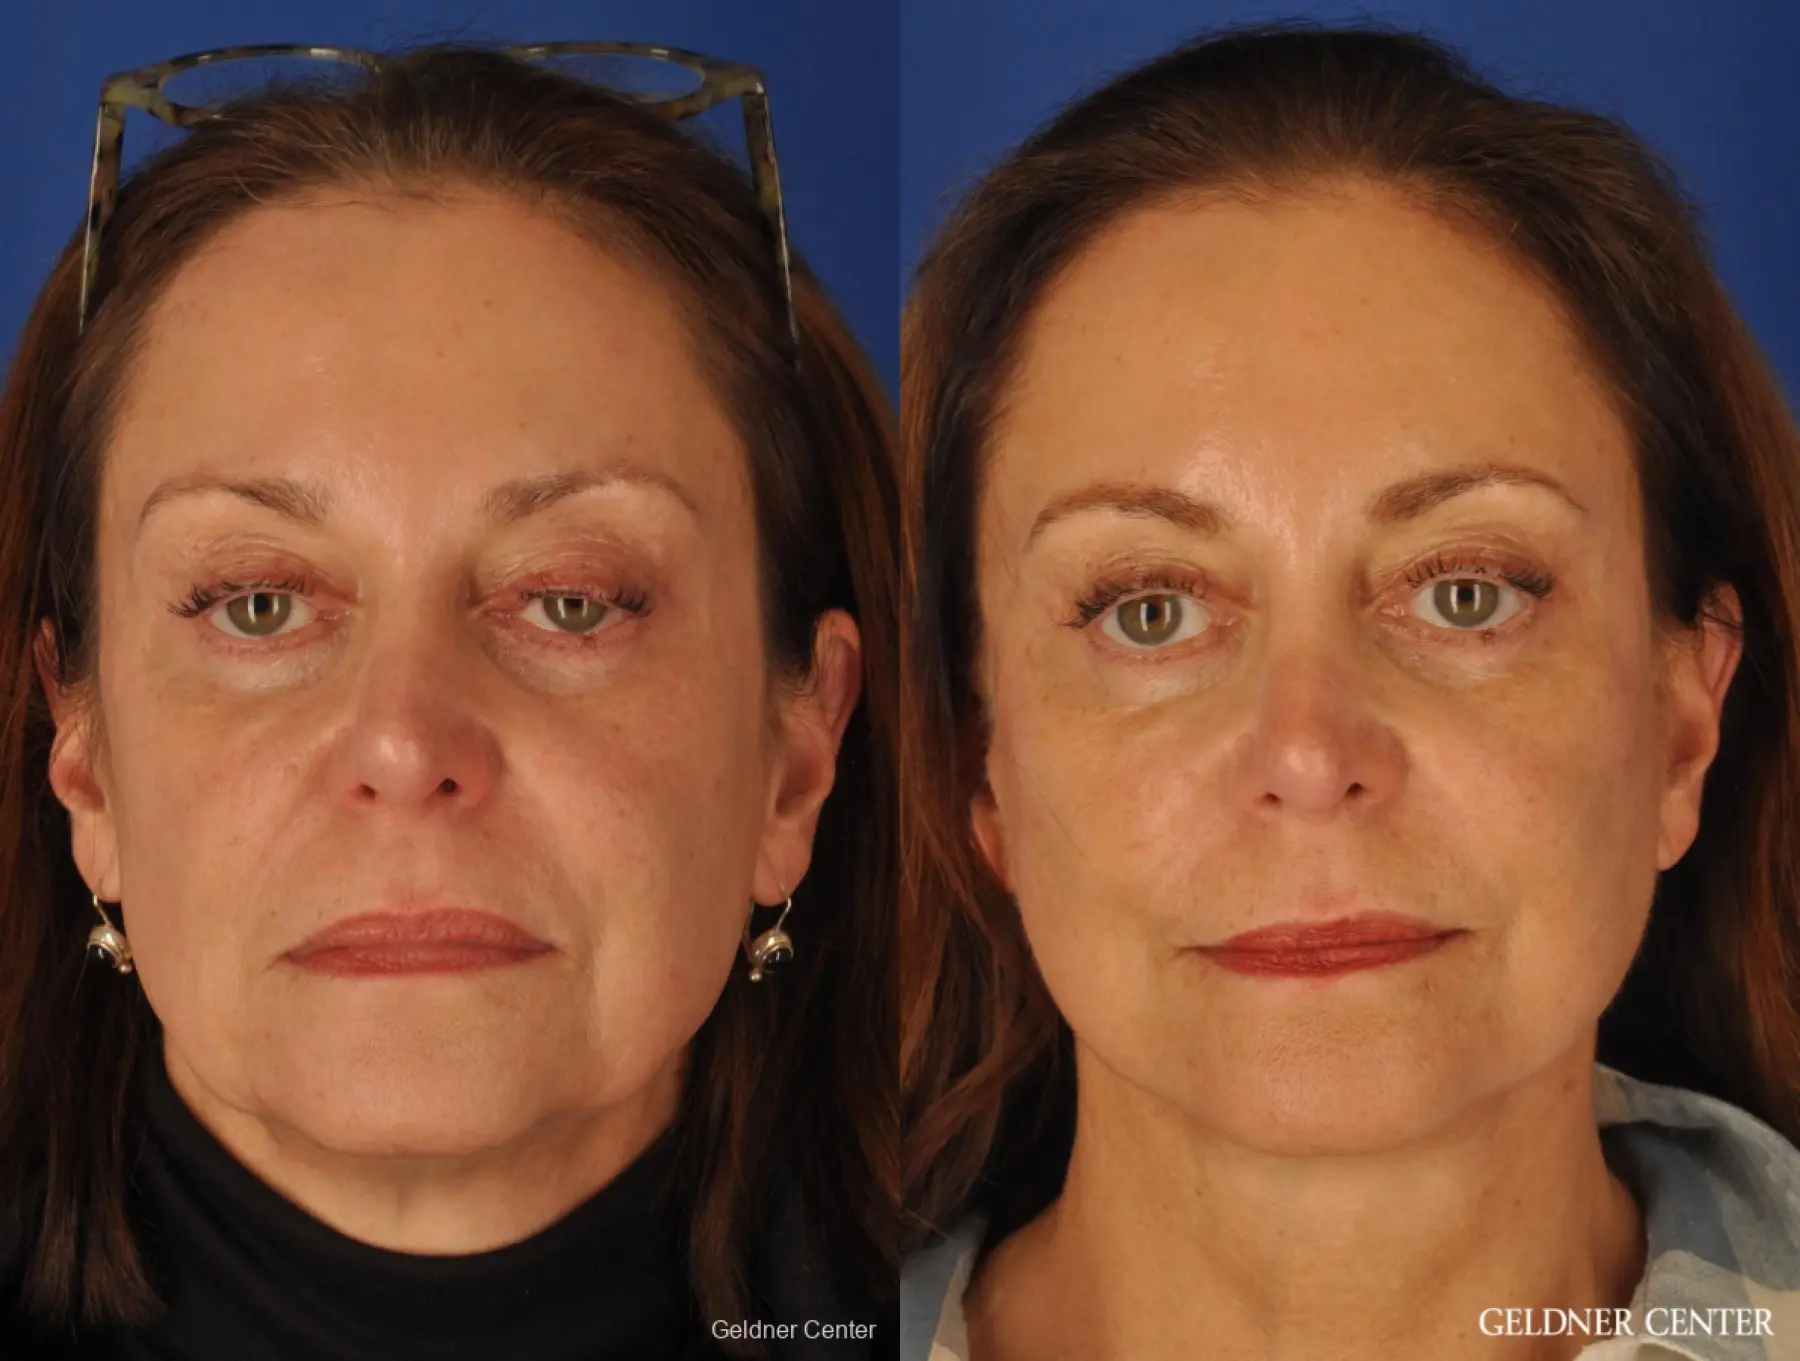 SMAS Facelift with Platysmaplasty - Before and After